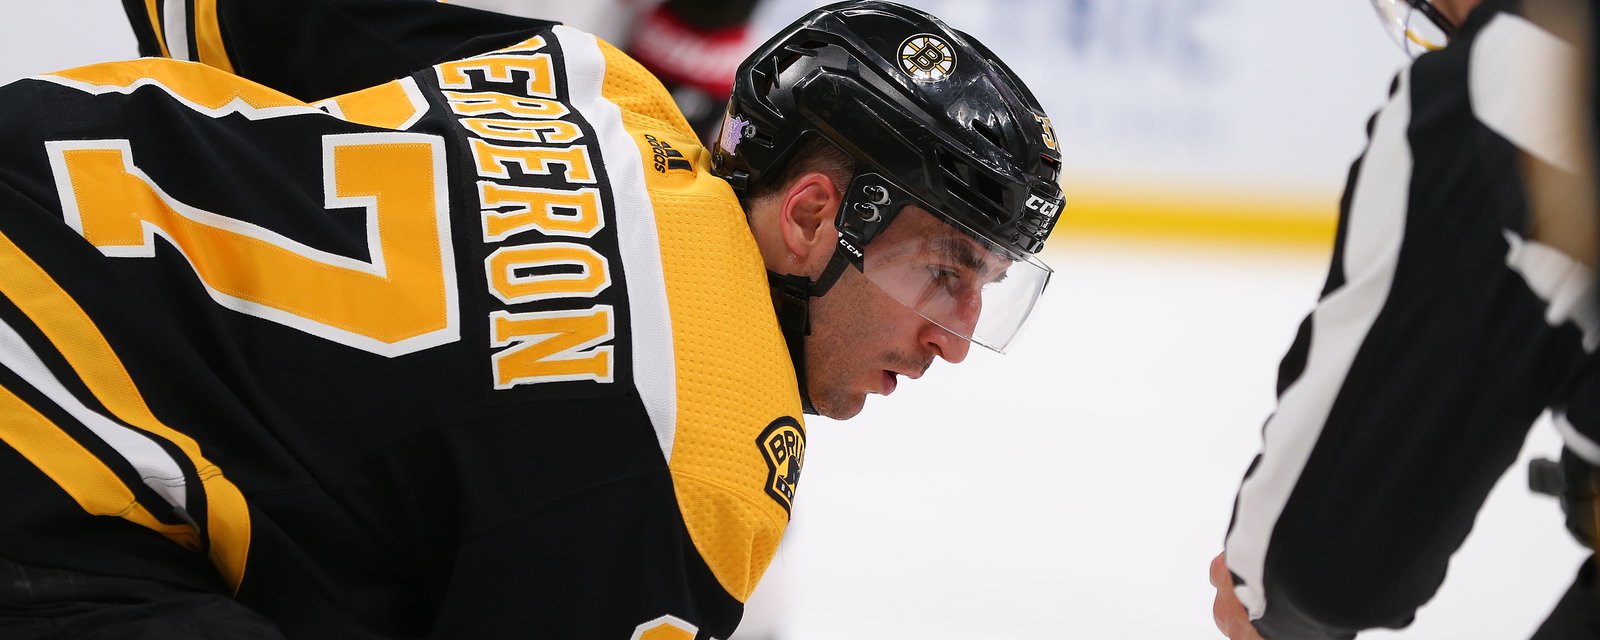 Huge blow for Boston as Bergeron is sidelined with an injury